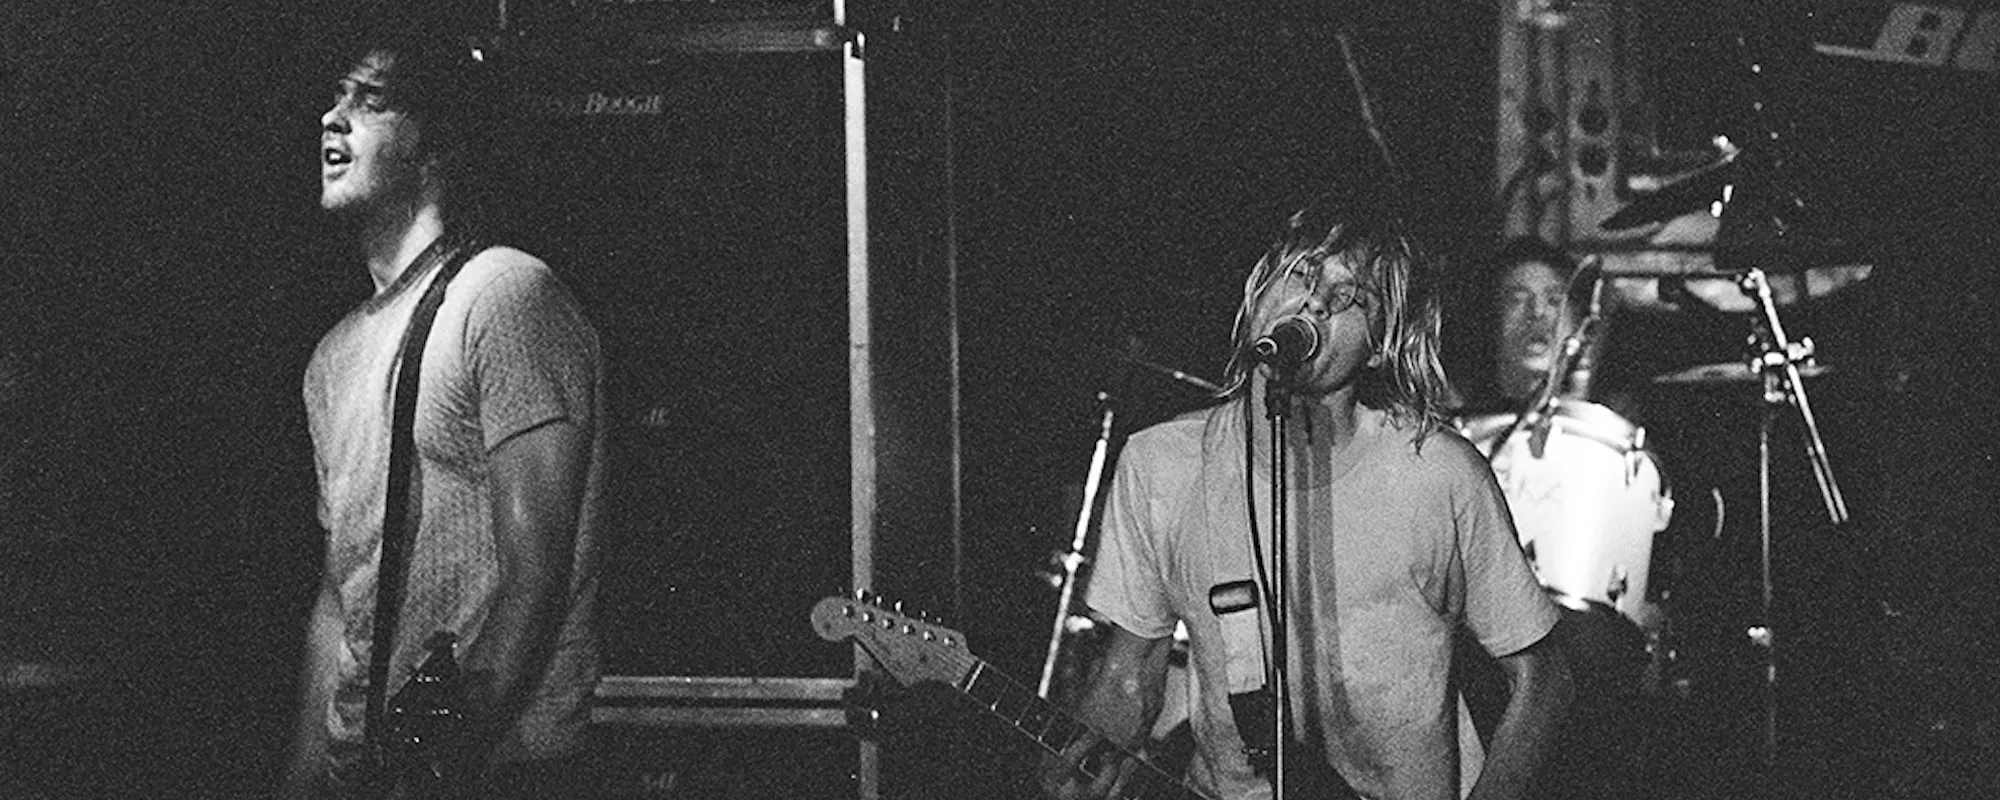 Rare Nirvana Photographs from 1991 Concert on Sale as NFTs